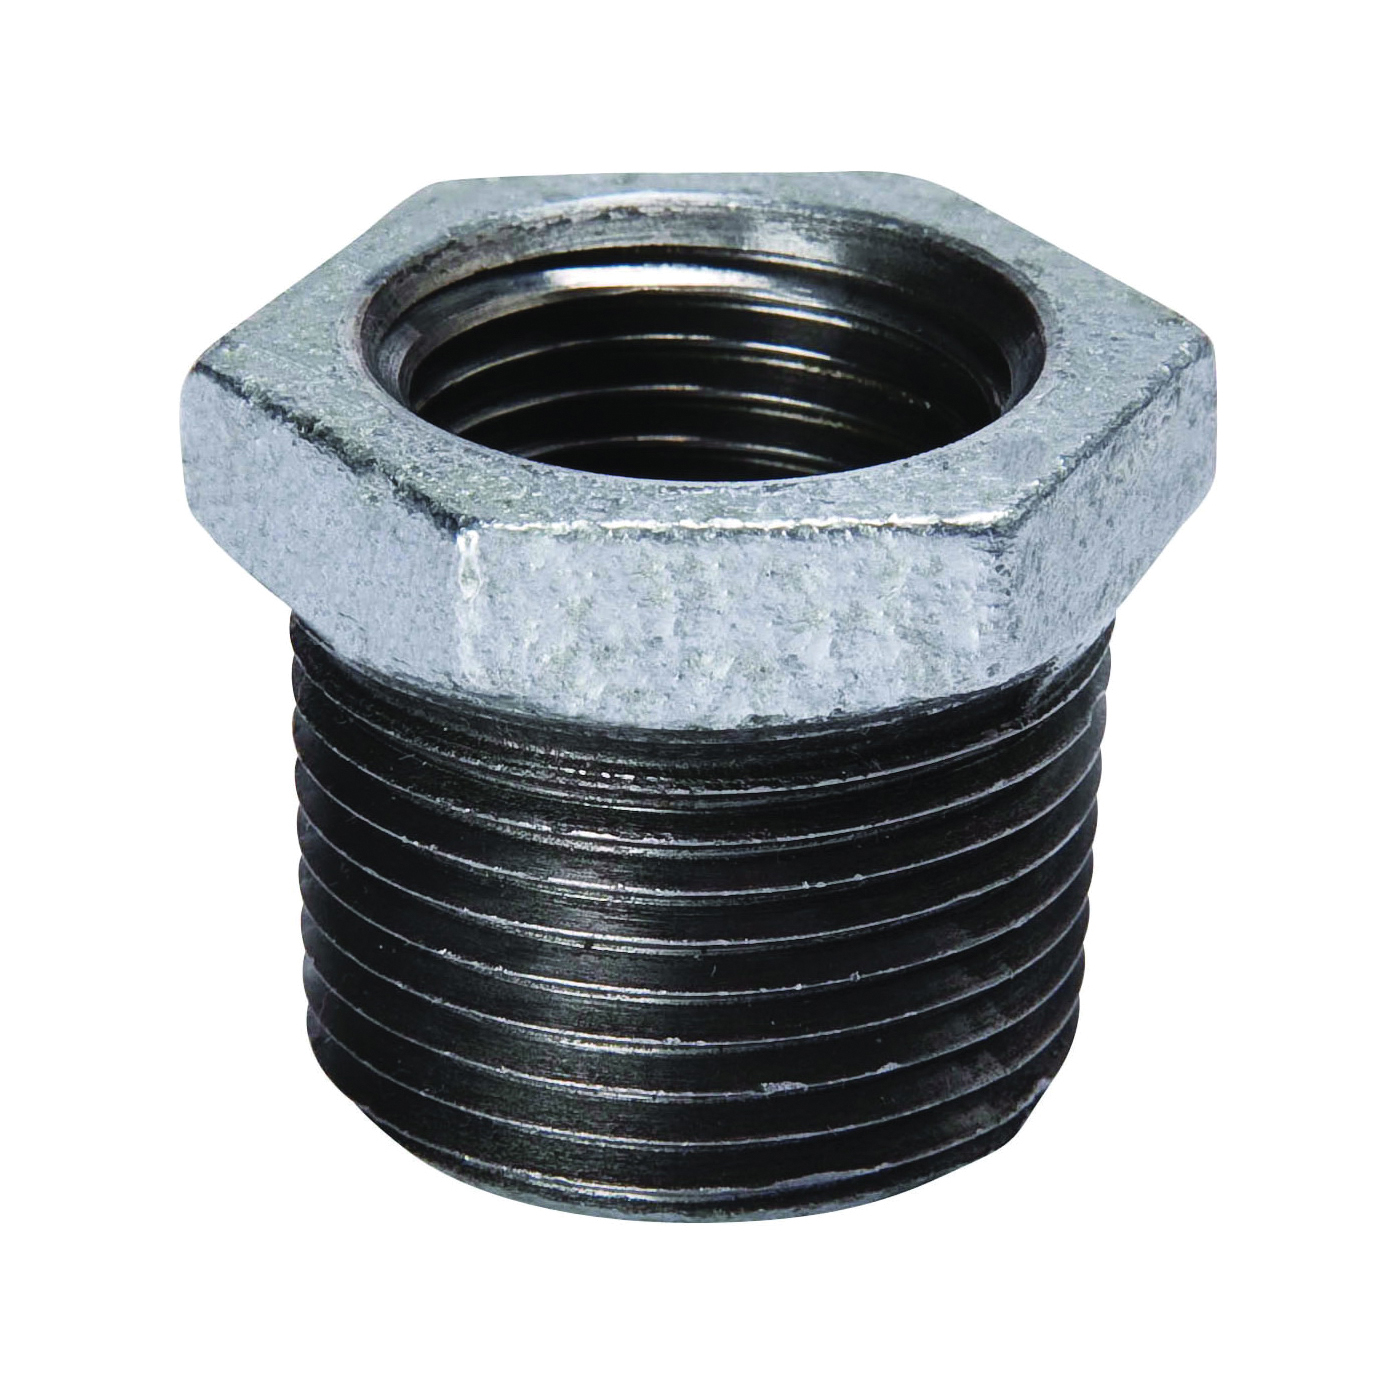 511-908BC Reducing Pipe Bushing, 3 x 2 in, Male x Female